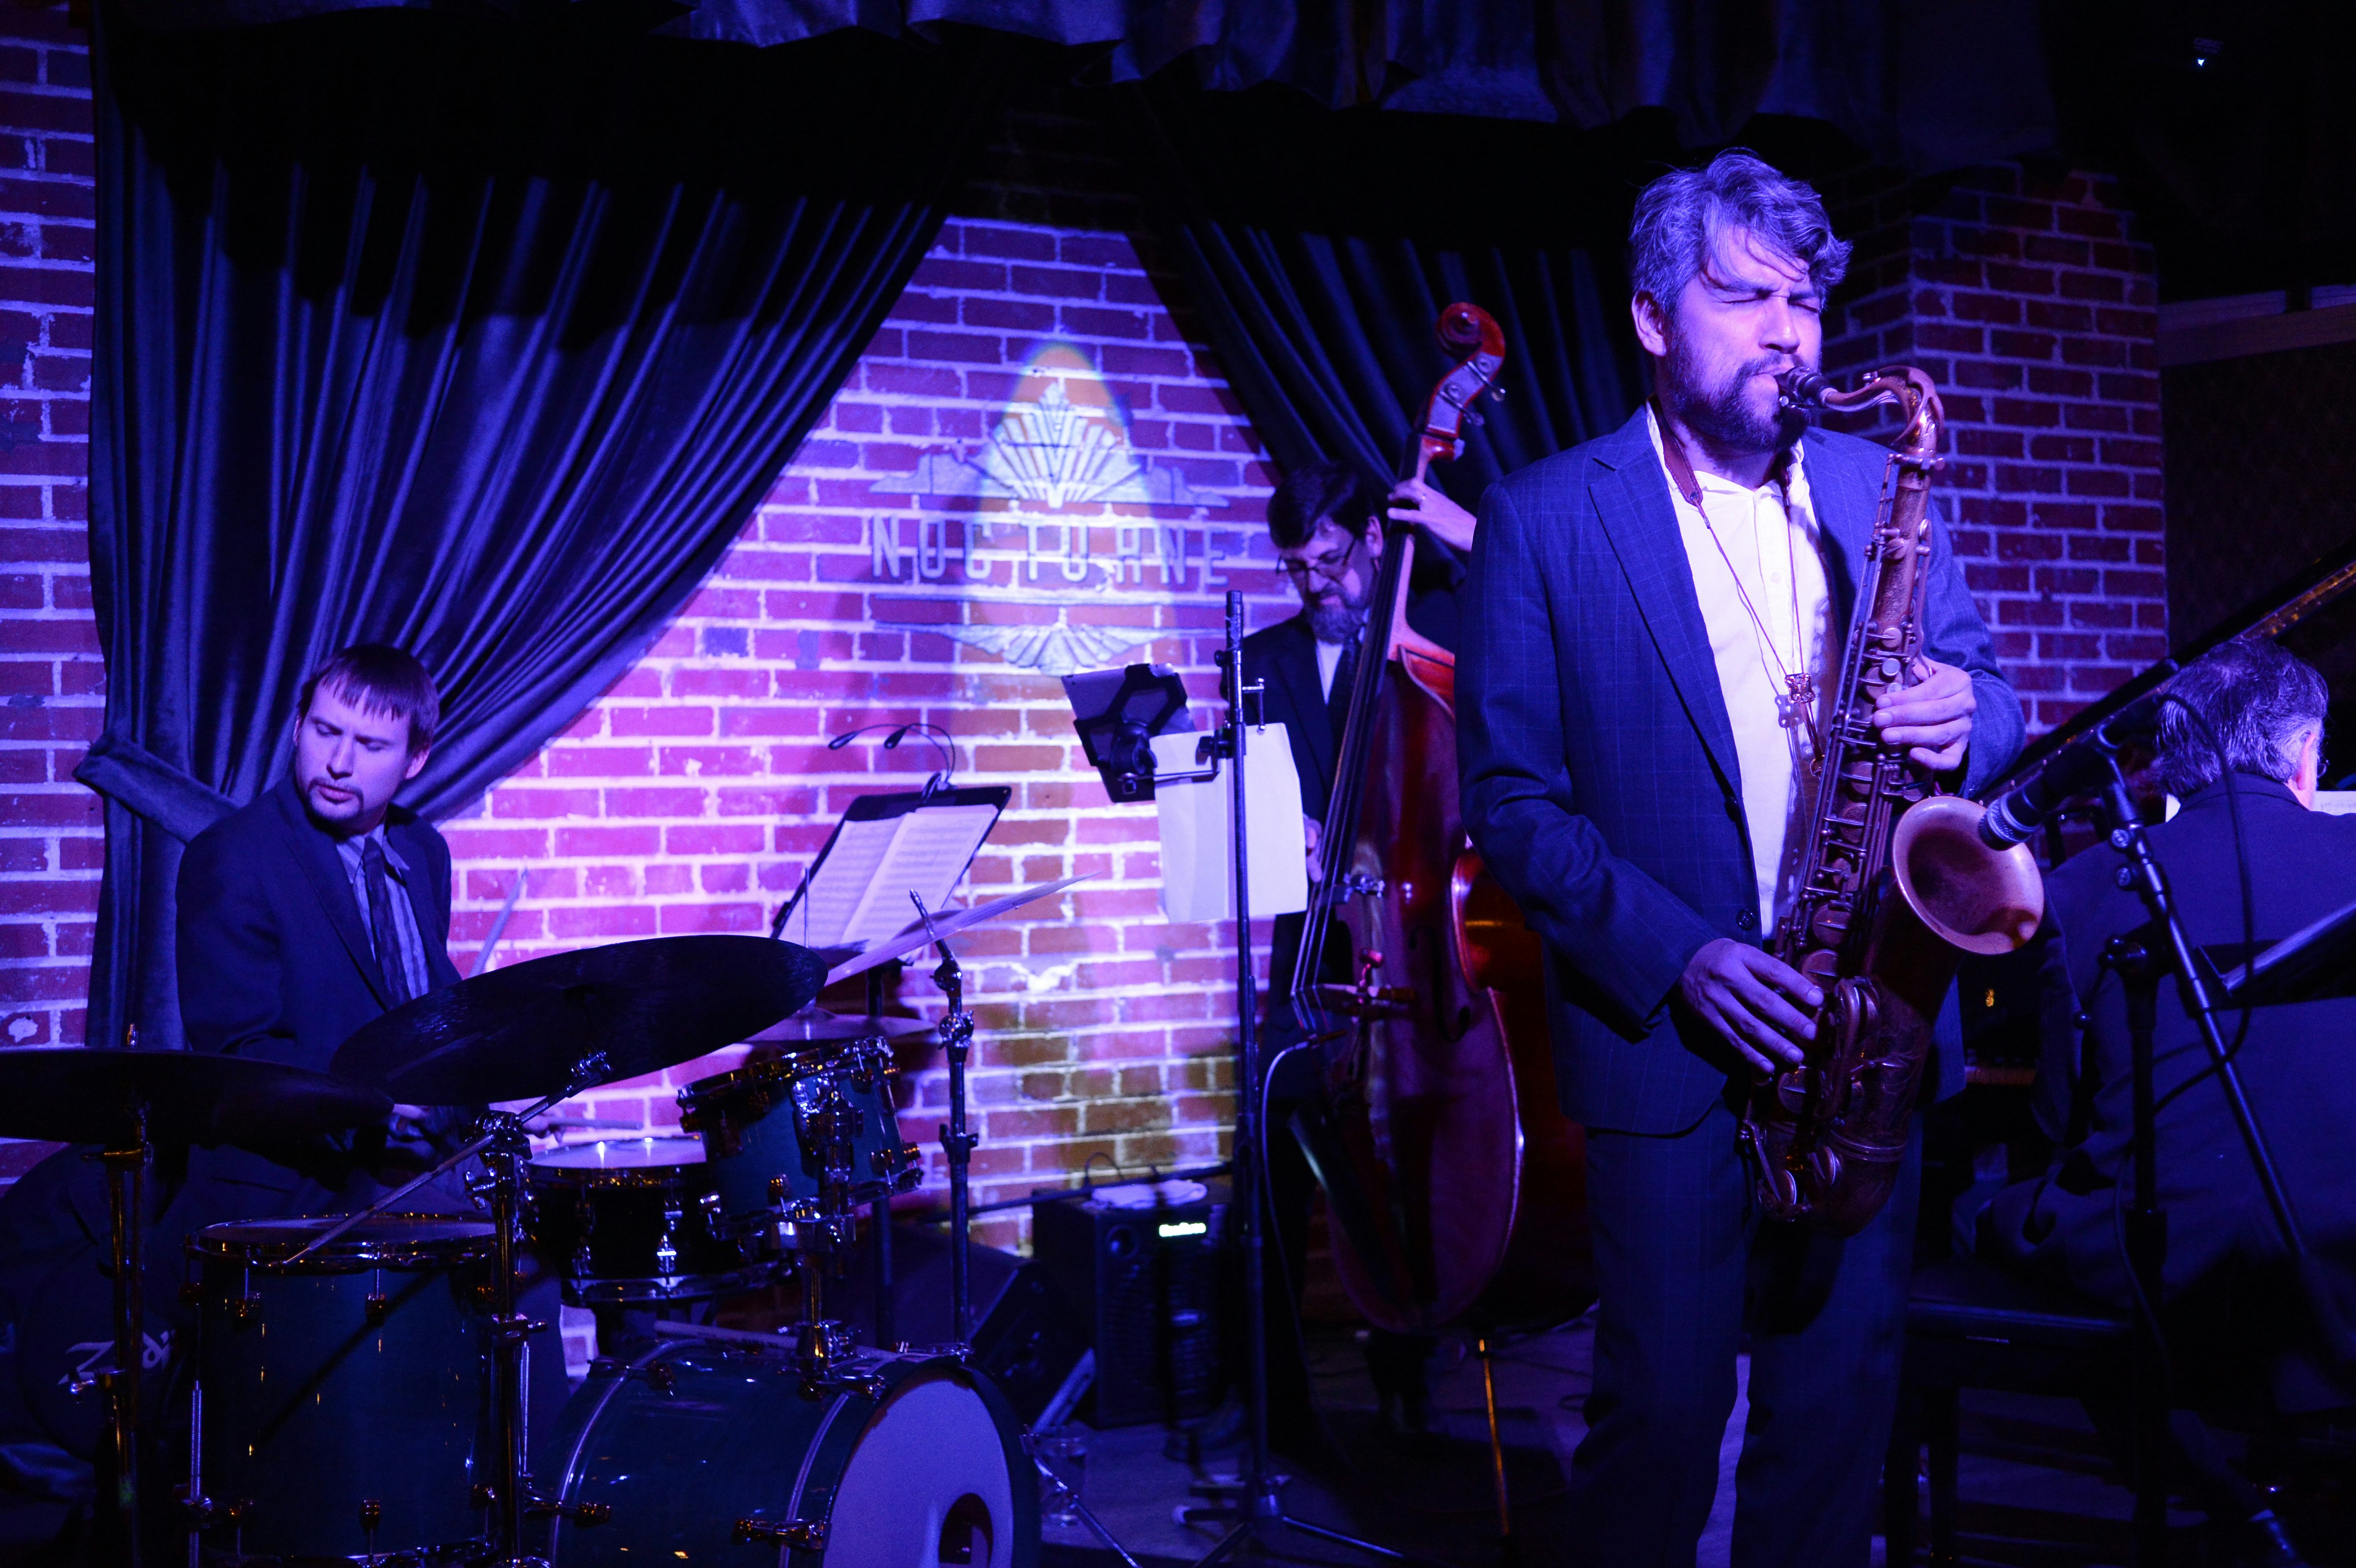 A jazz trio in dark casual suits play an upright bass, a saxophone, and drums under purple lights on stage at Nocturne jazz club 